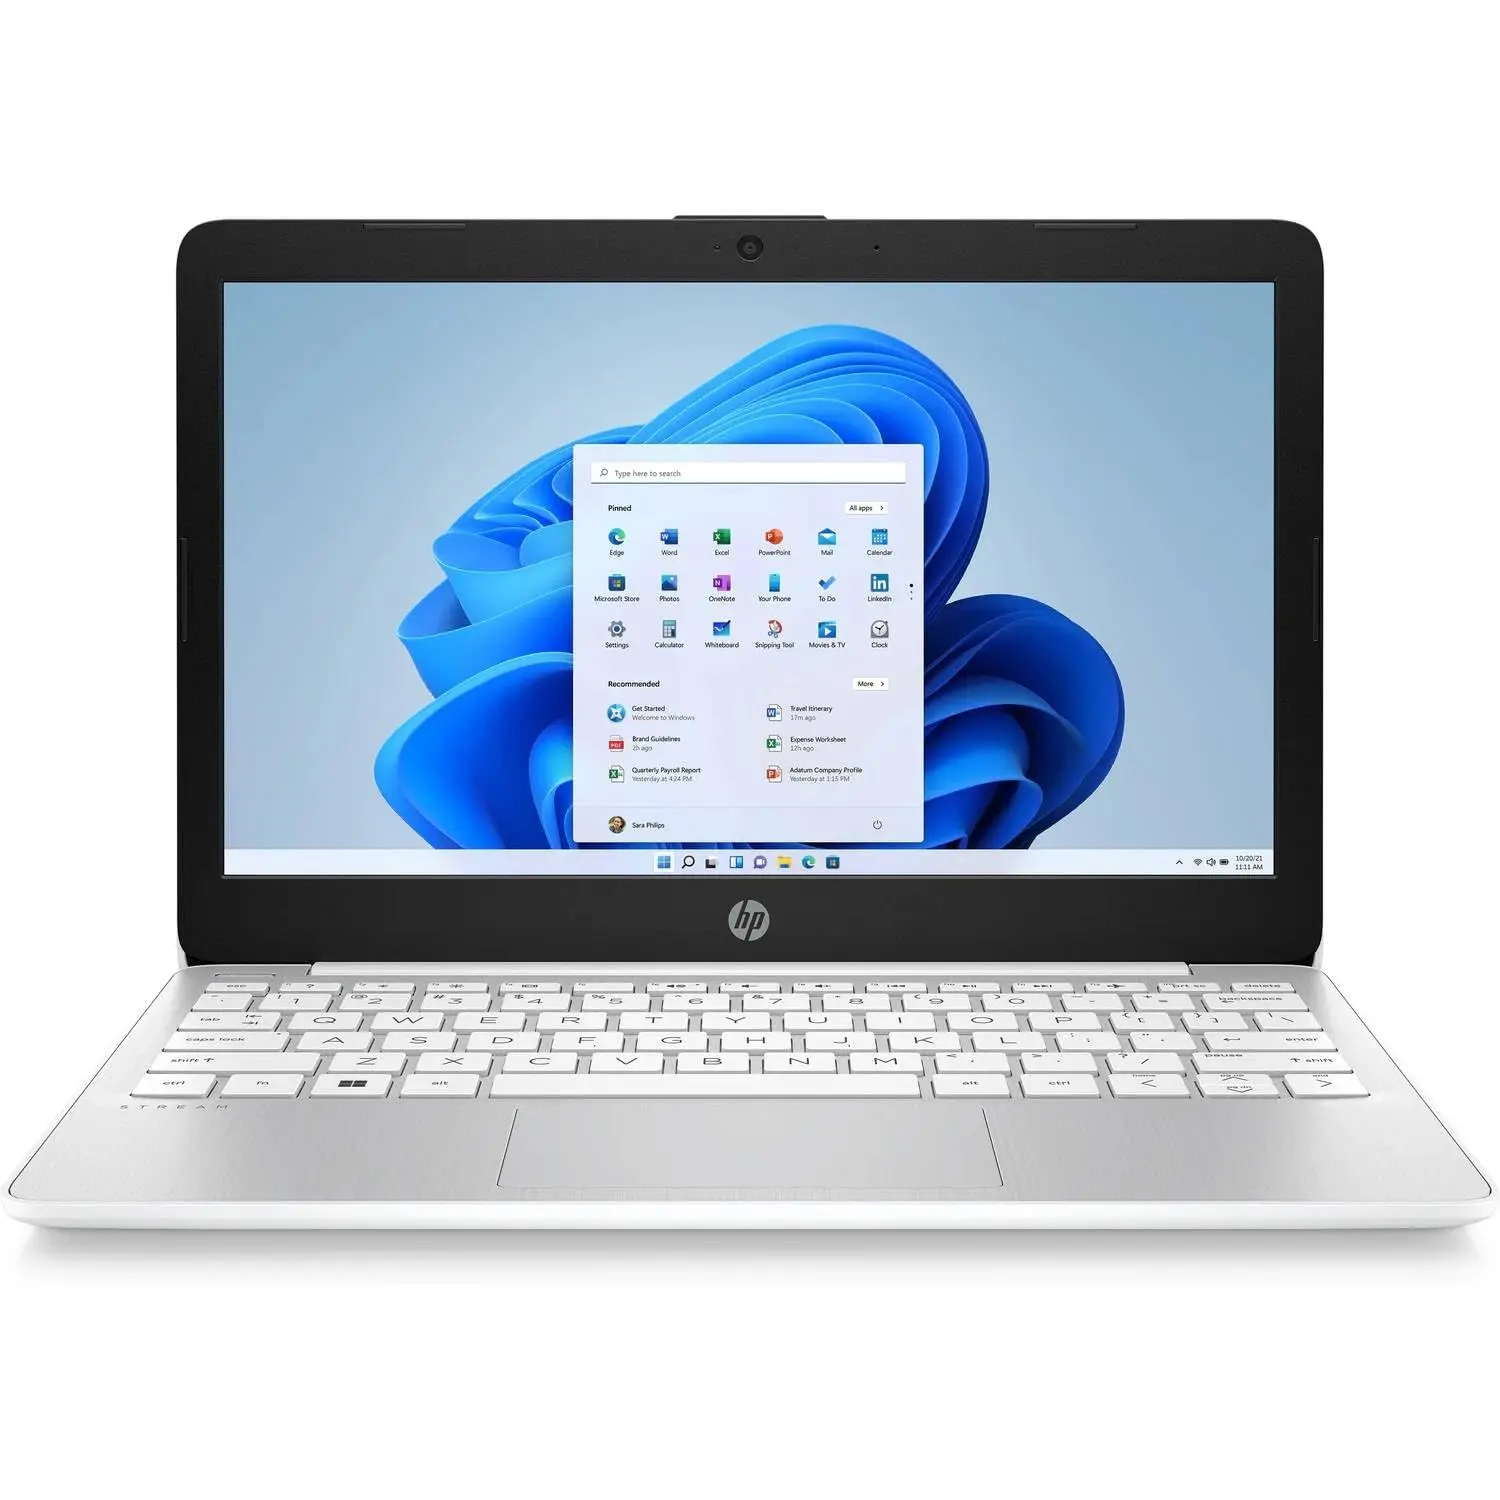 Ultimate guide to hp notebook computers